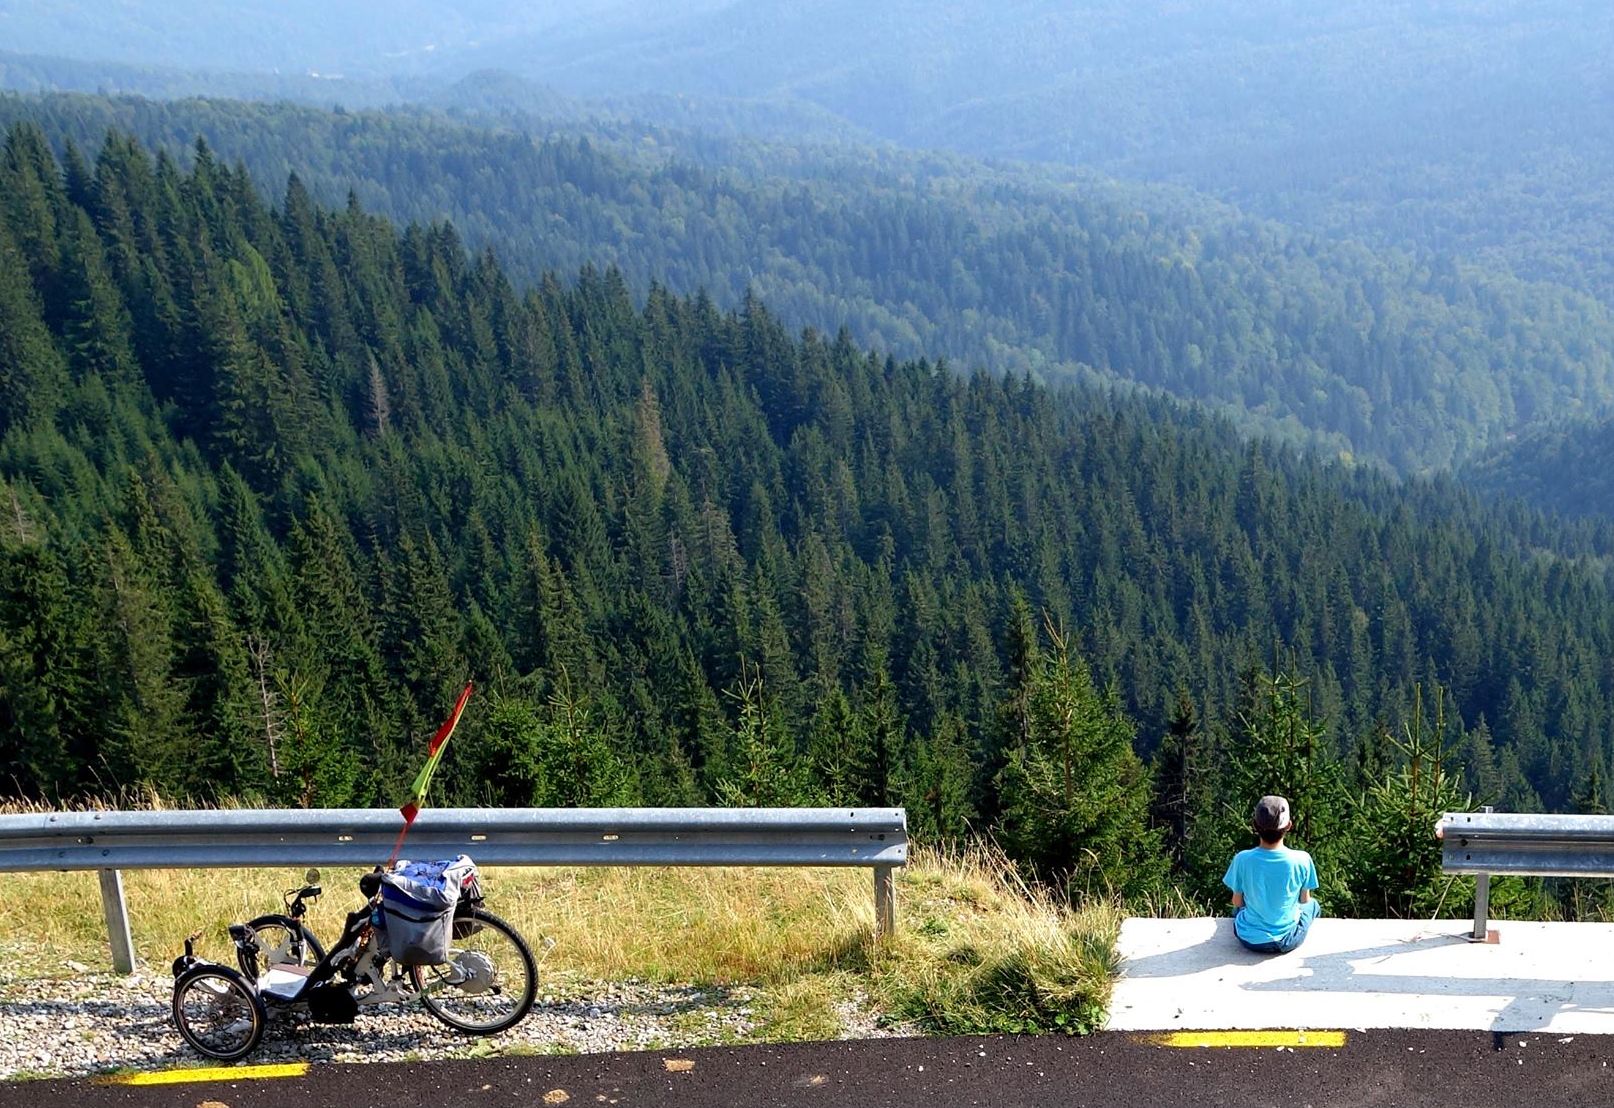 A man sits at the edge of a suspended highway overlooking forests. A trike is parked close to him. 